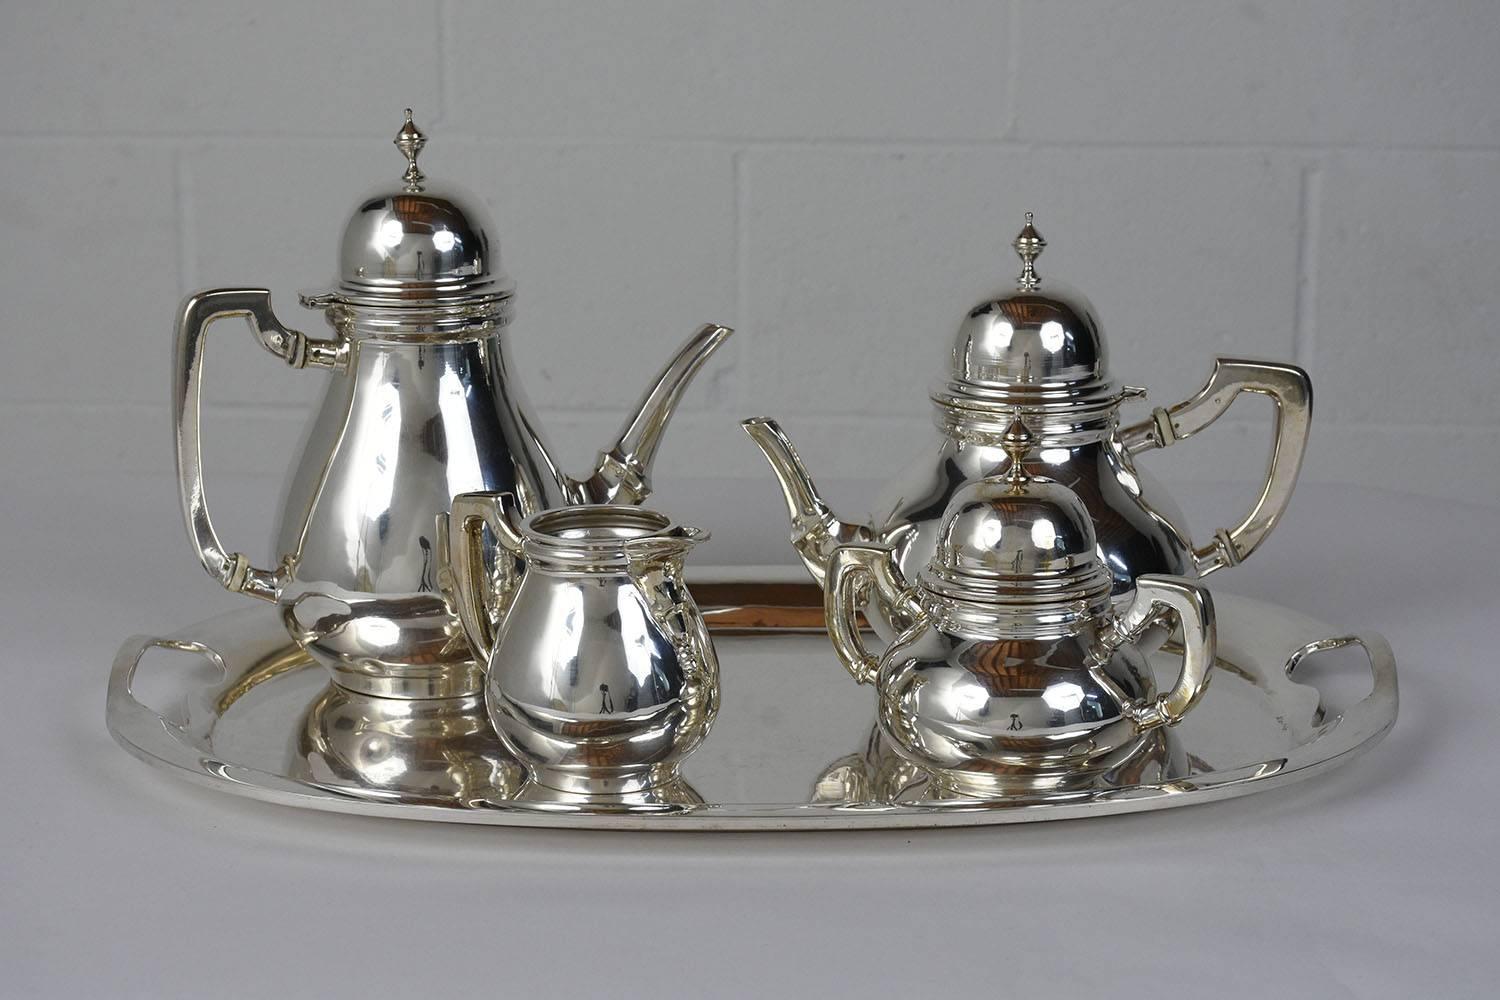 This five-piece Tiffany-style tea set is made of sterling silver stamped .925 and is a host's dream. The set includes a coffee pot, tea pot, milk jar, sugar dish, and serving platter. The tea set features a Classic and timeless design and clean